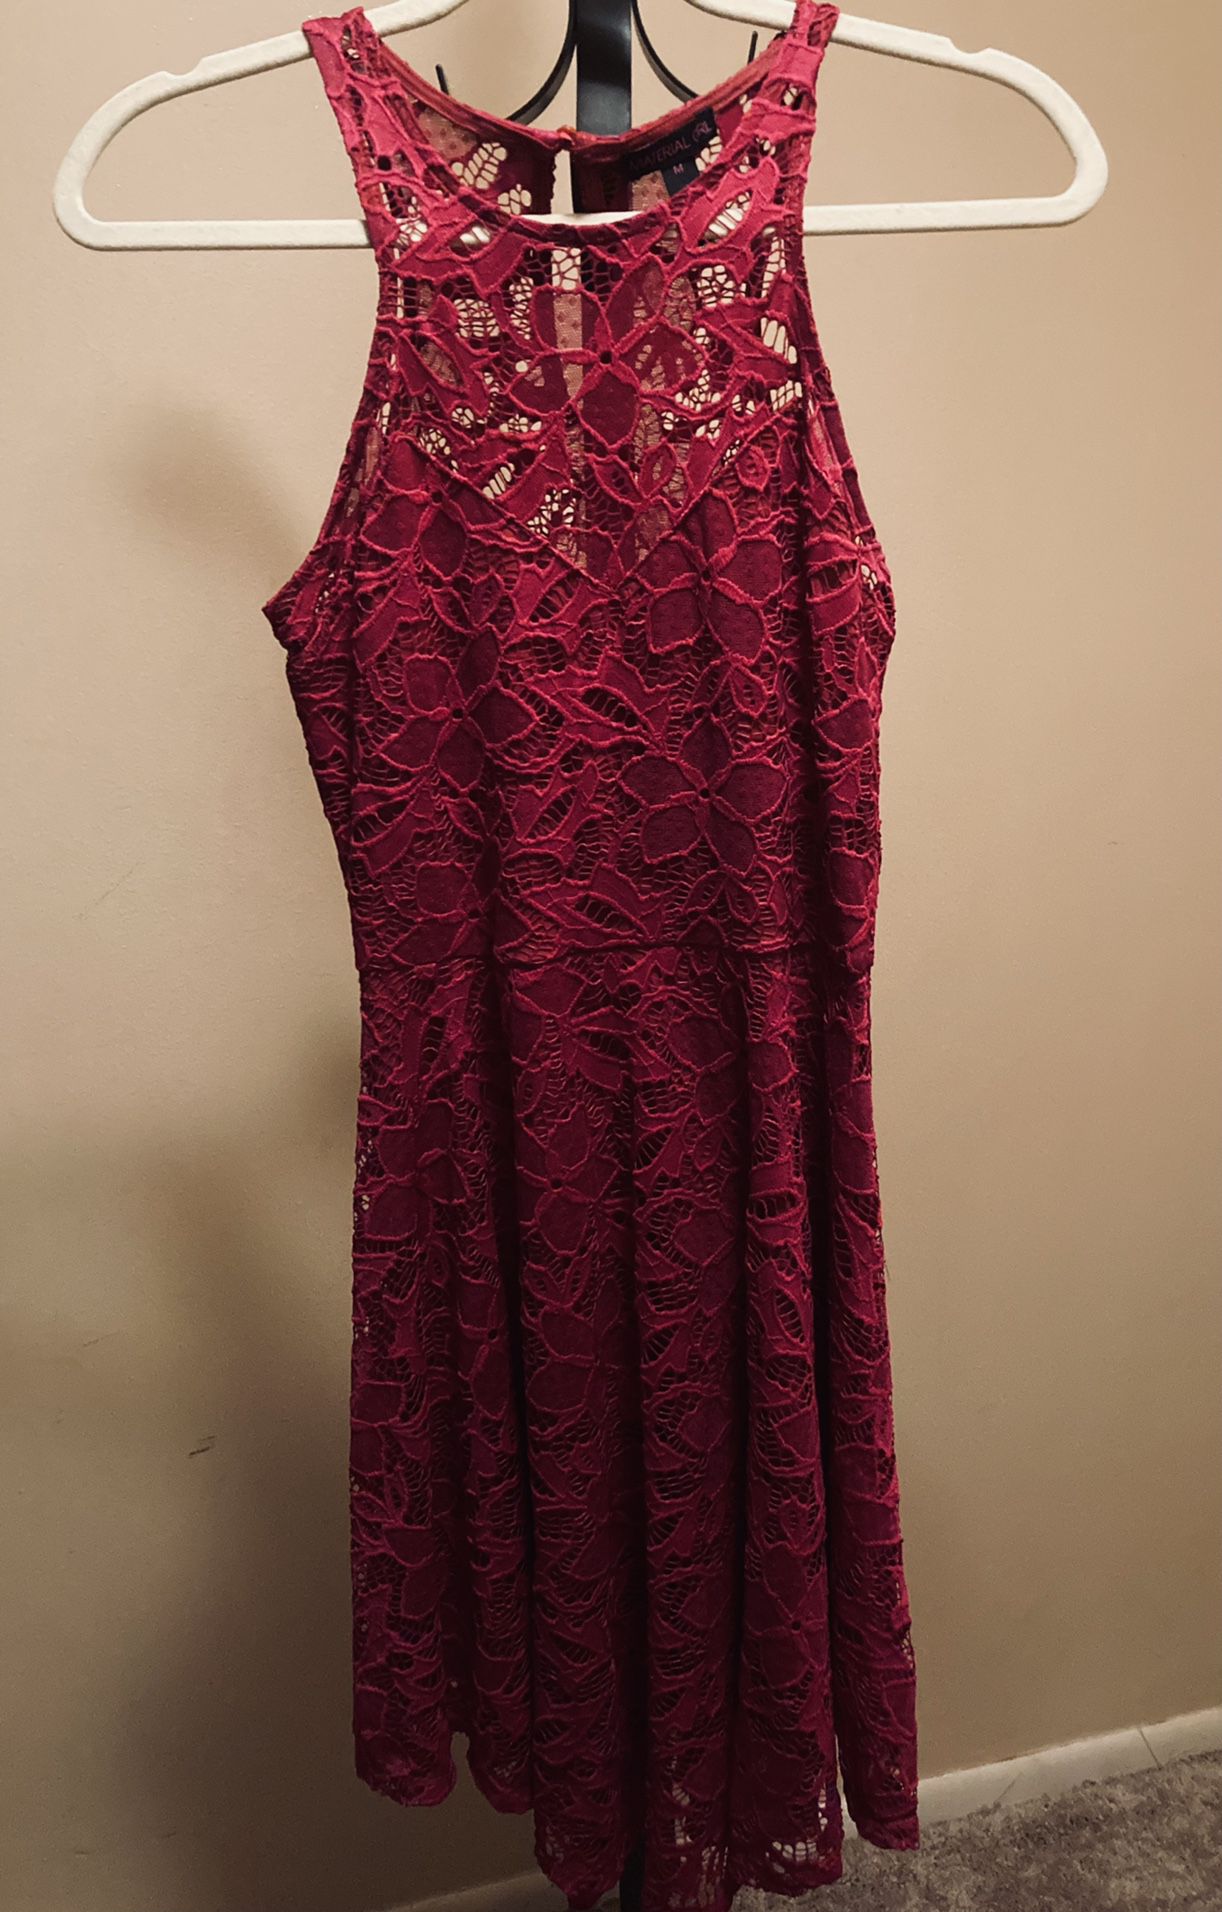 Juniors Size M Lacy Dress - Lined